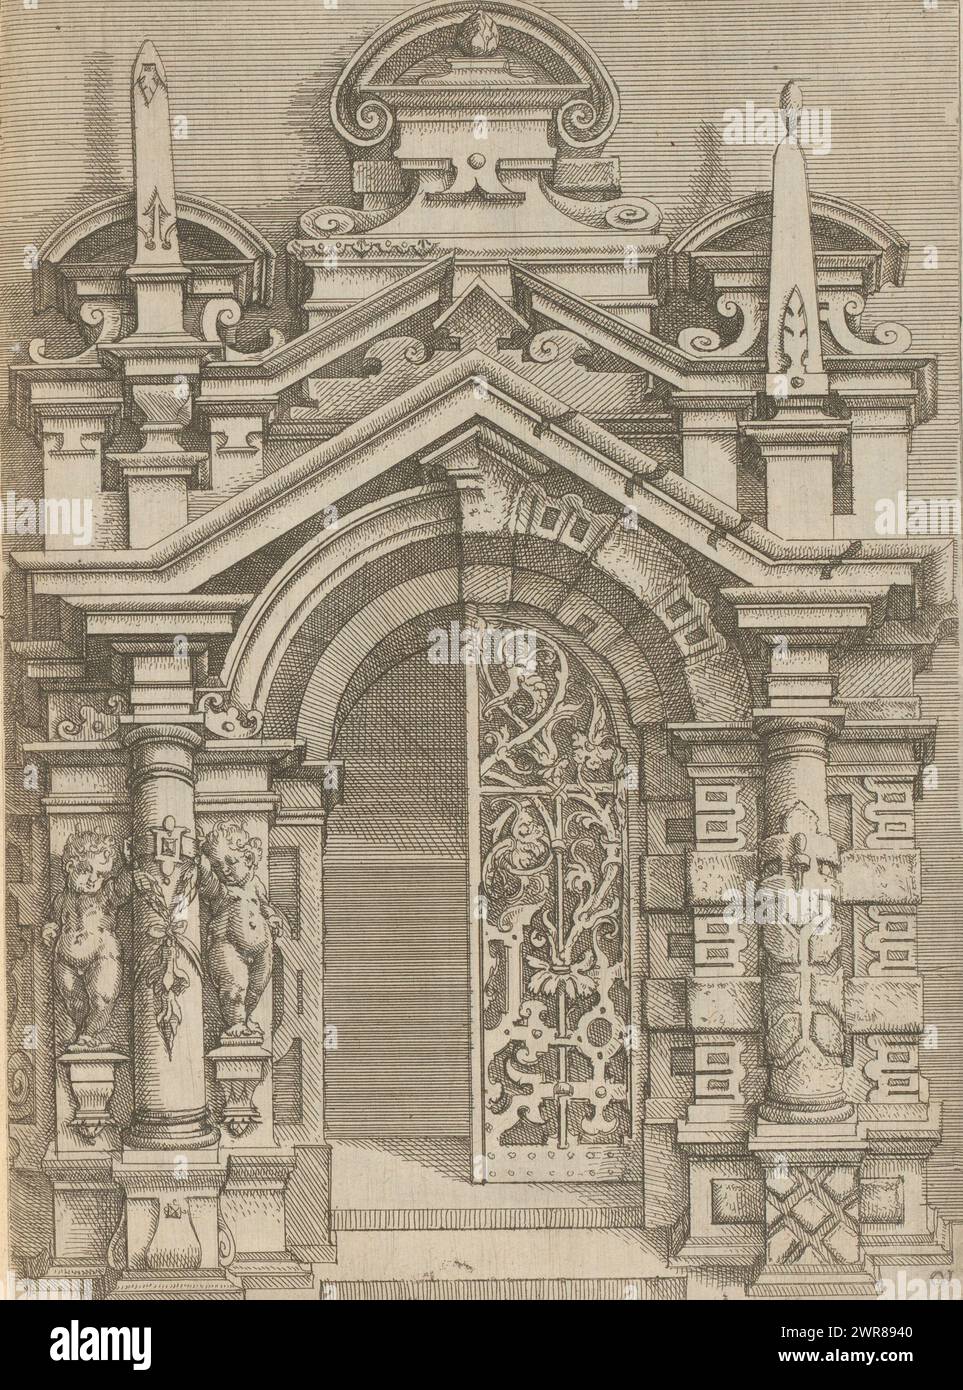 Portal with various ornaments, Architectura (series title), Numbered: 10. Print is part of a book., print maker: Wendel Dietterlin (I), publisher: Bernhard Jobin, Straatsburg (Frankrijk), 1593 - 1595, paper, etching, height 247 mm × width 208 mm Stock Photo